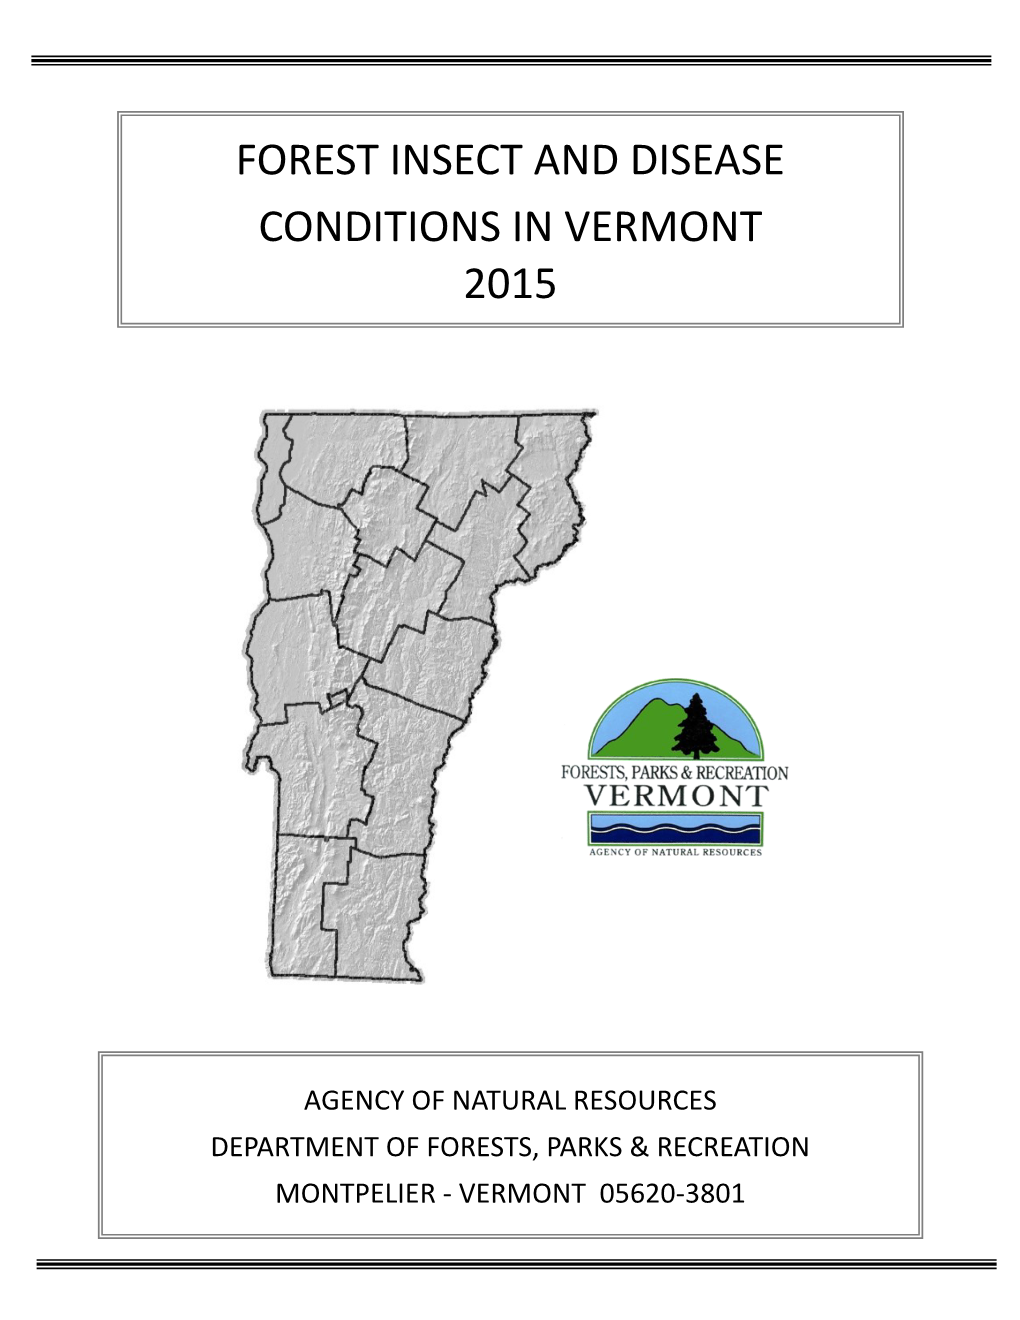 Vermont 2015 Forest Insect and Disease Conditions Report